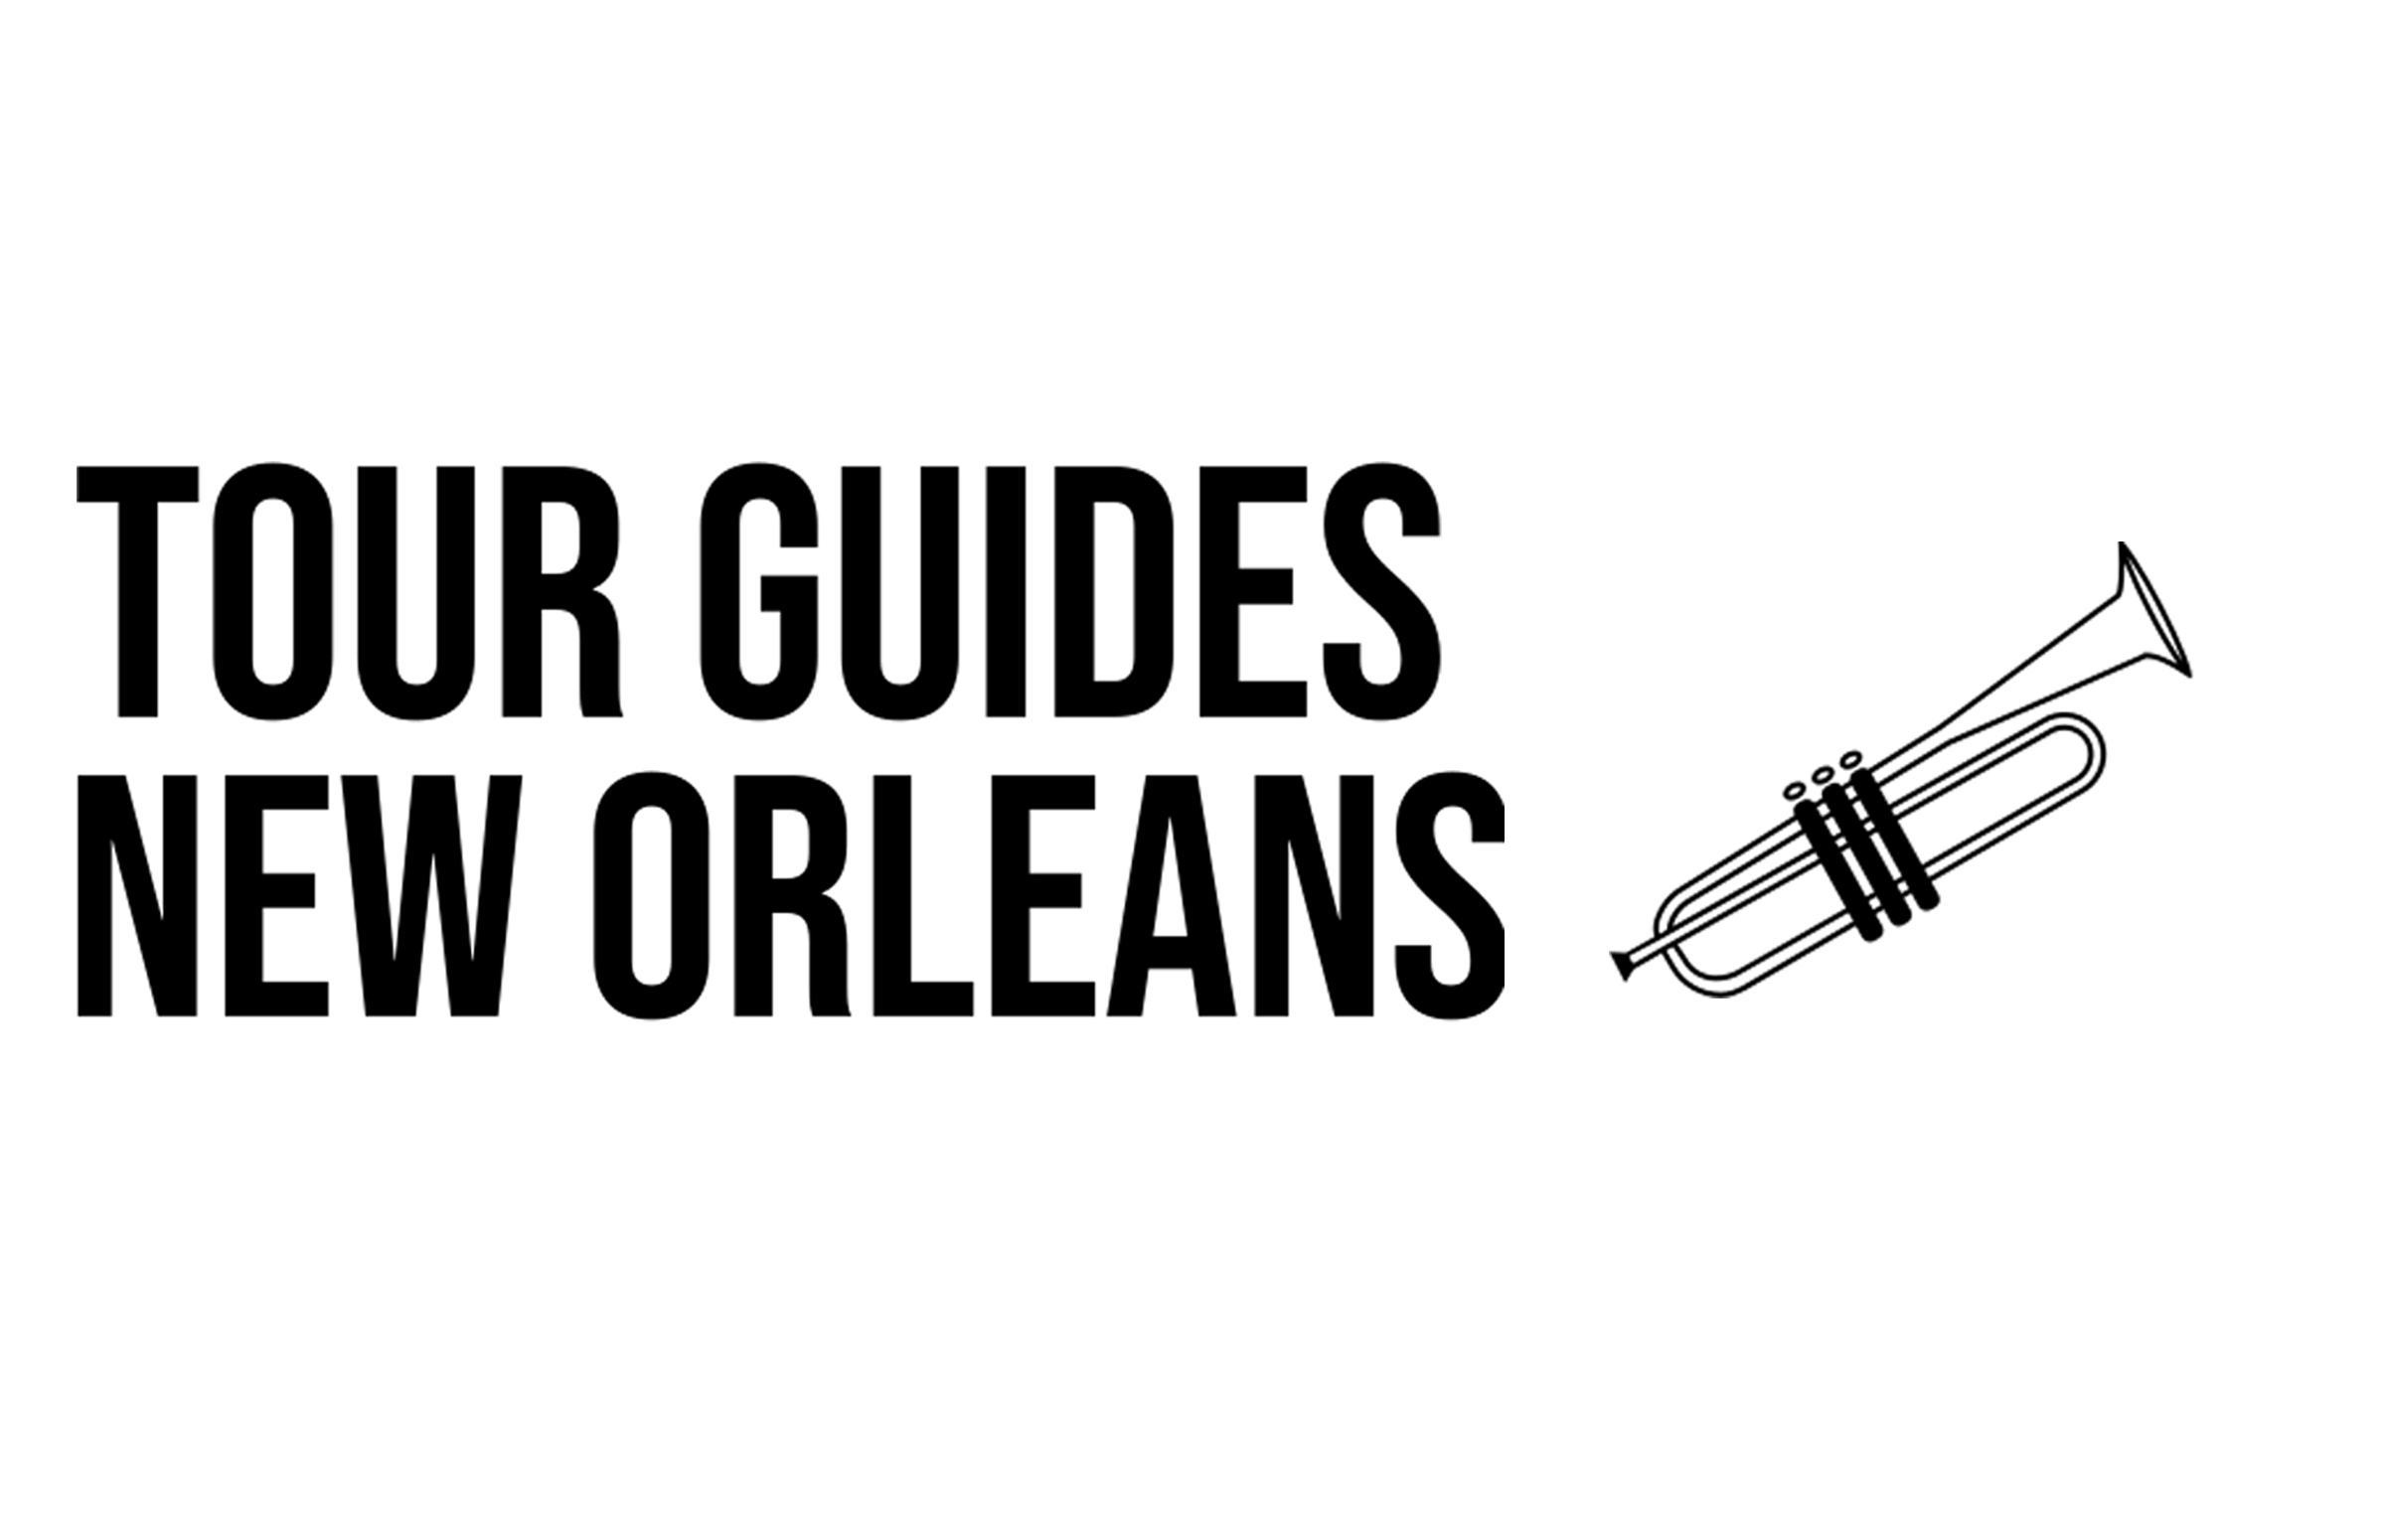 Things To See In New Orleans